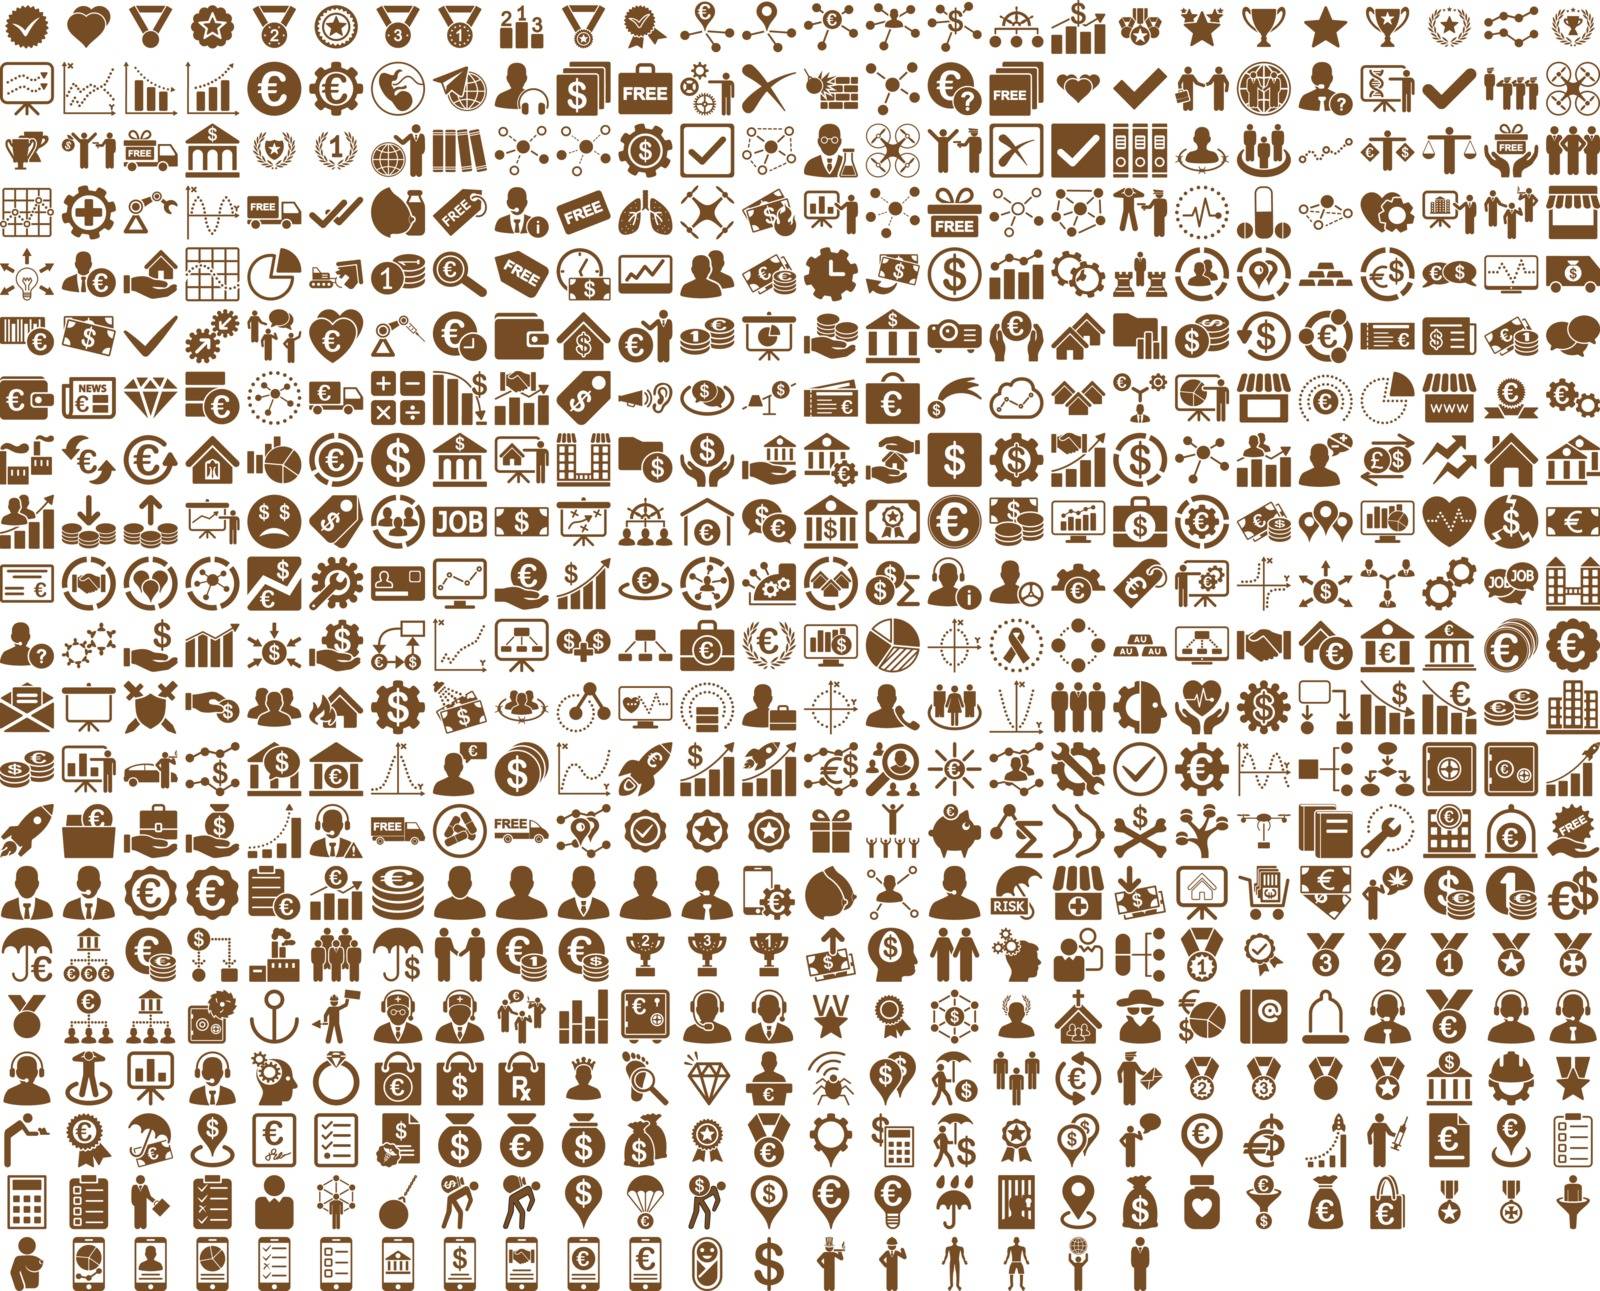 Application Toolbar Icons. 576 flat icons use brown color. Vector images are isolated on a white background. 